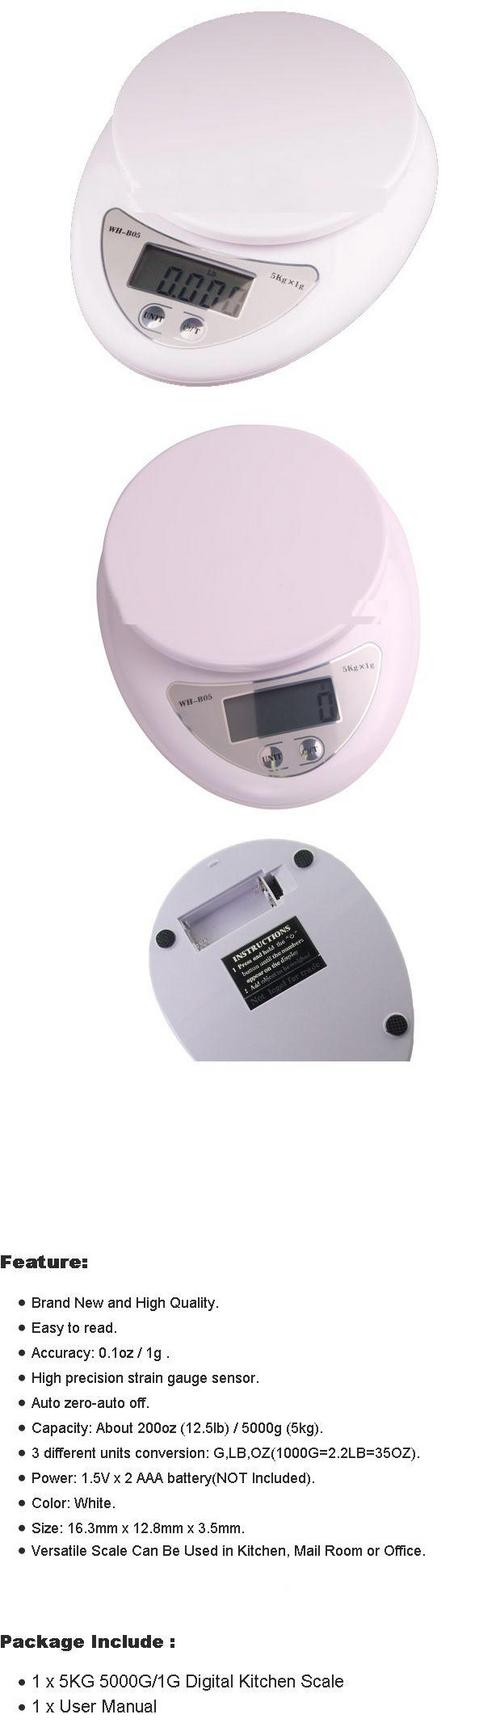 COMPACT DiGiTAL KiTCHEN FOOD DIET POSTAL WEIGH LESS LCD SCALE# Usave R1200 #